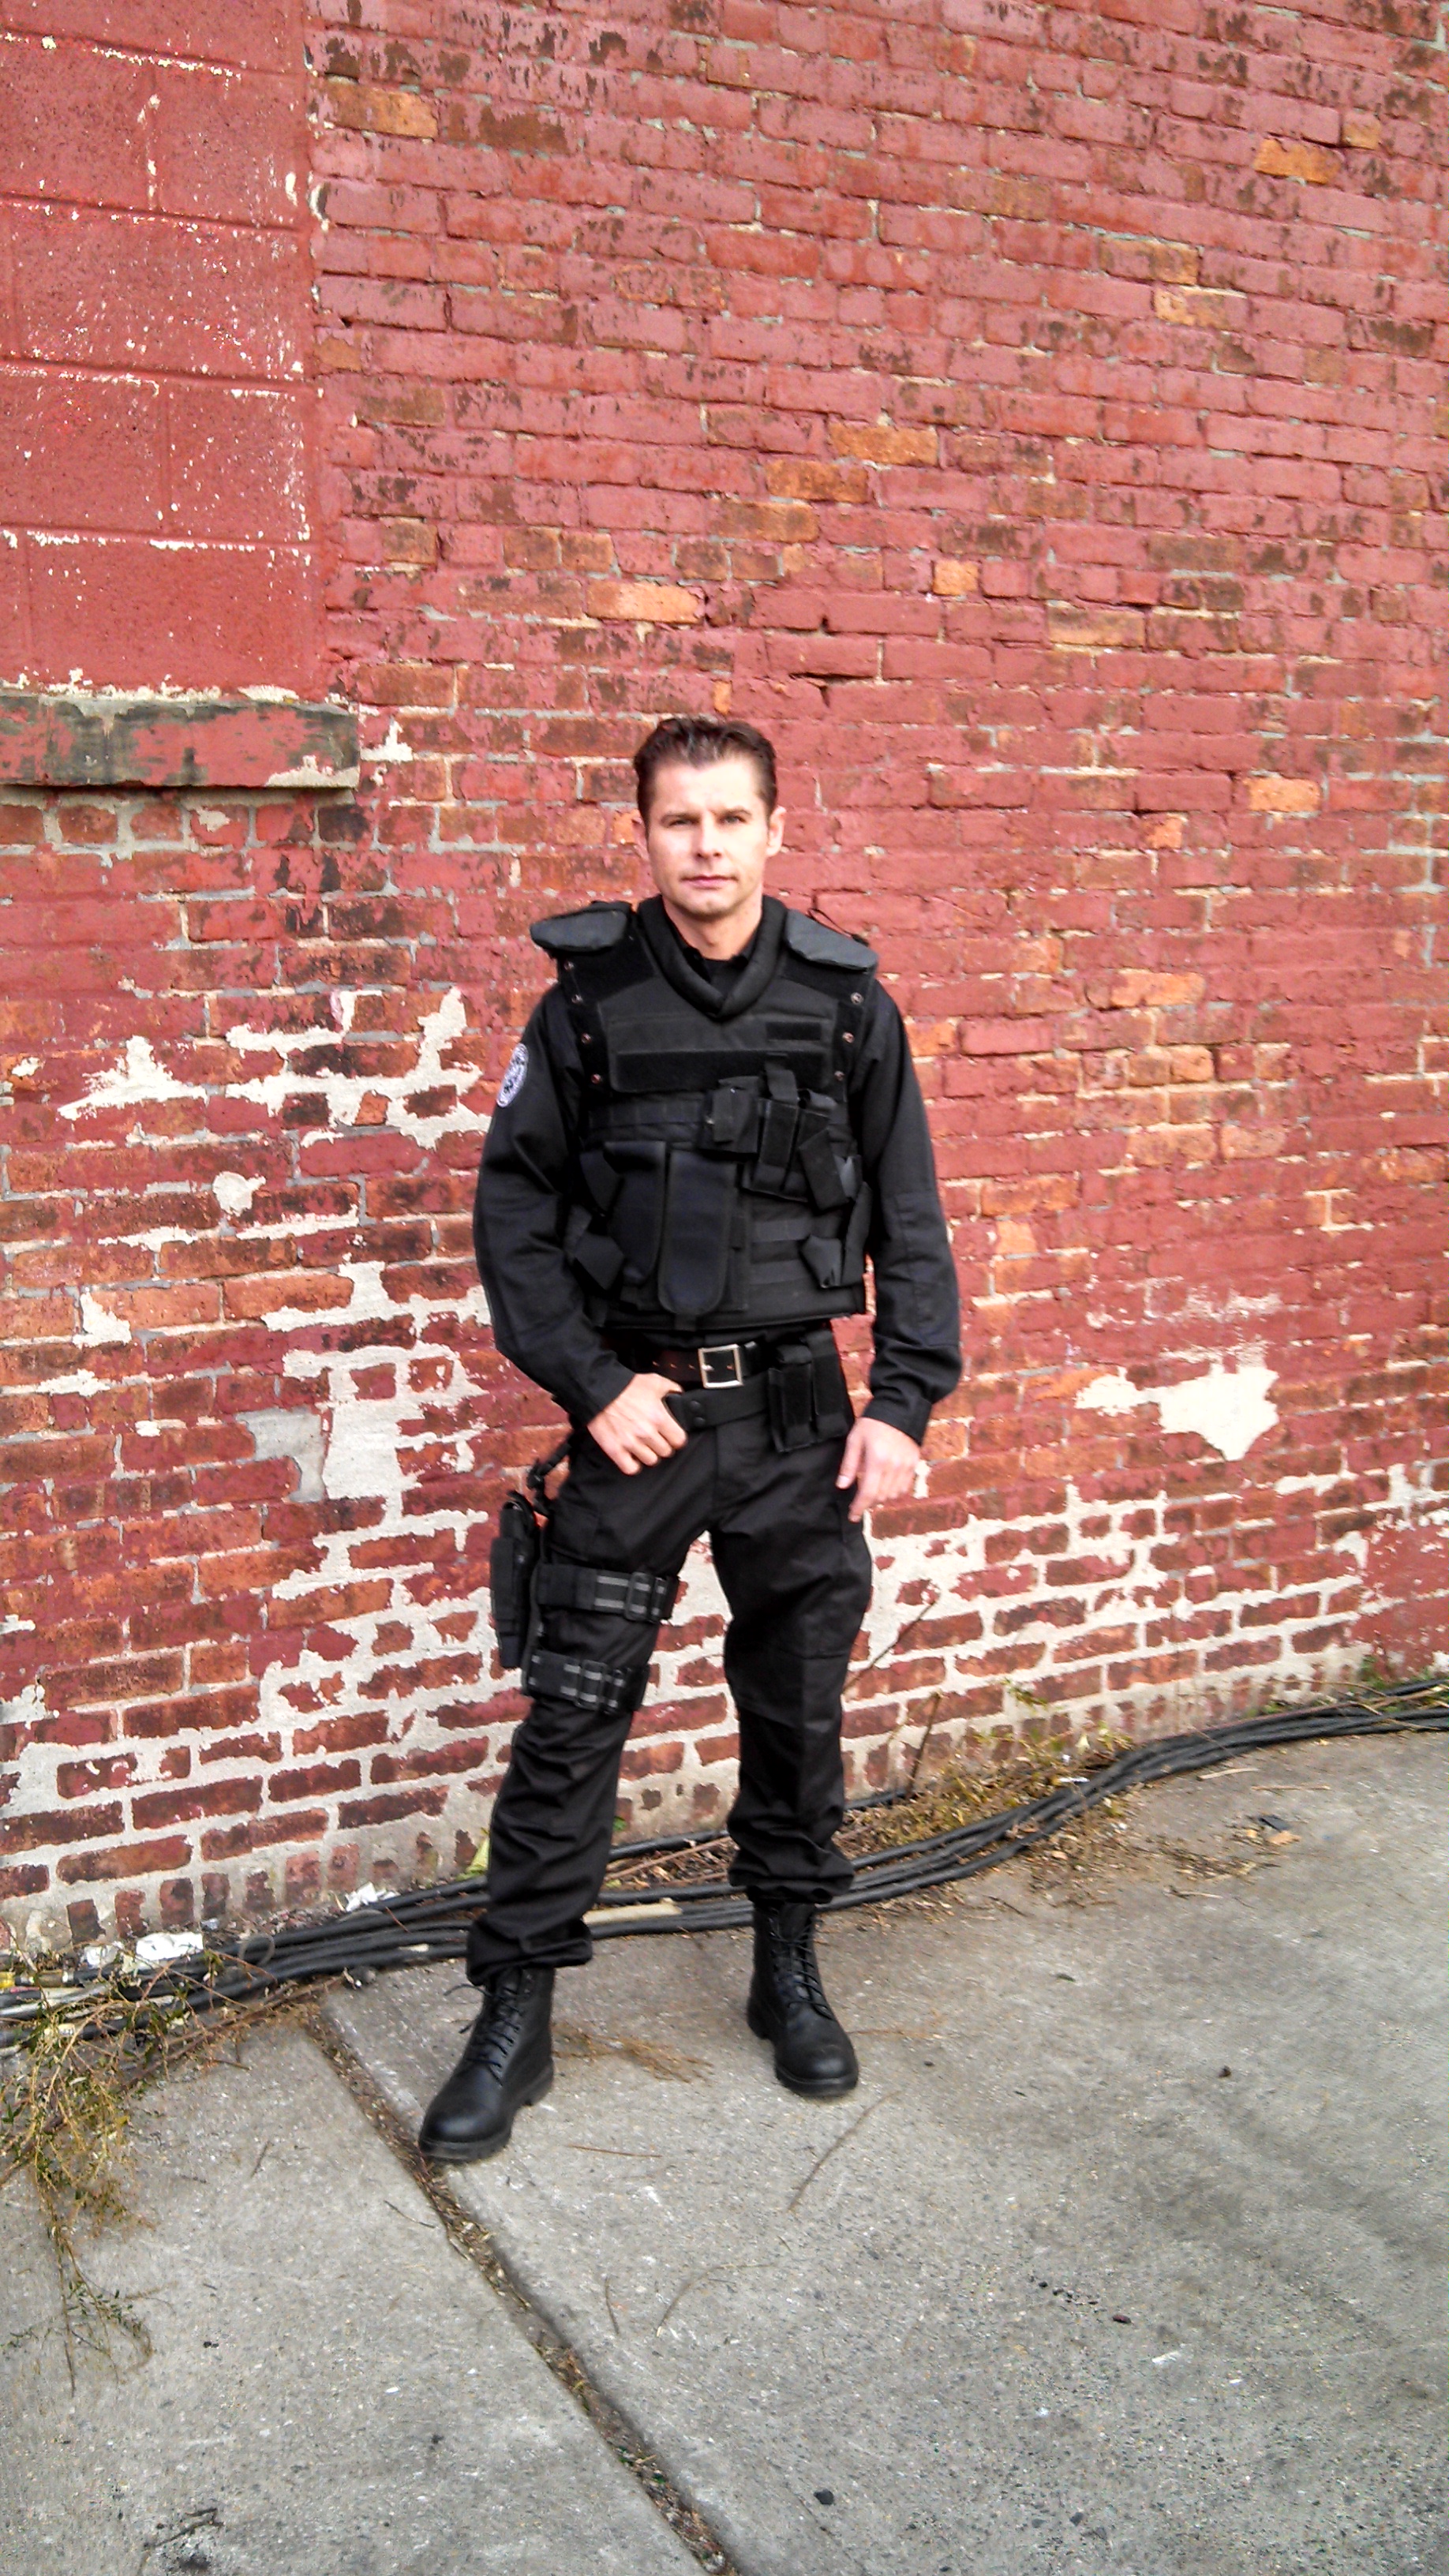 Jerry Lobrow as an FBI Swat Team Special Agent on The Black List